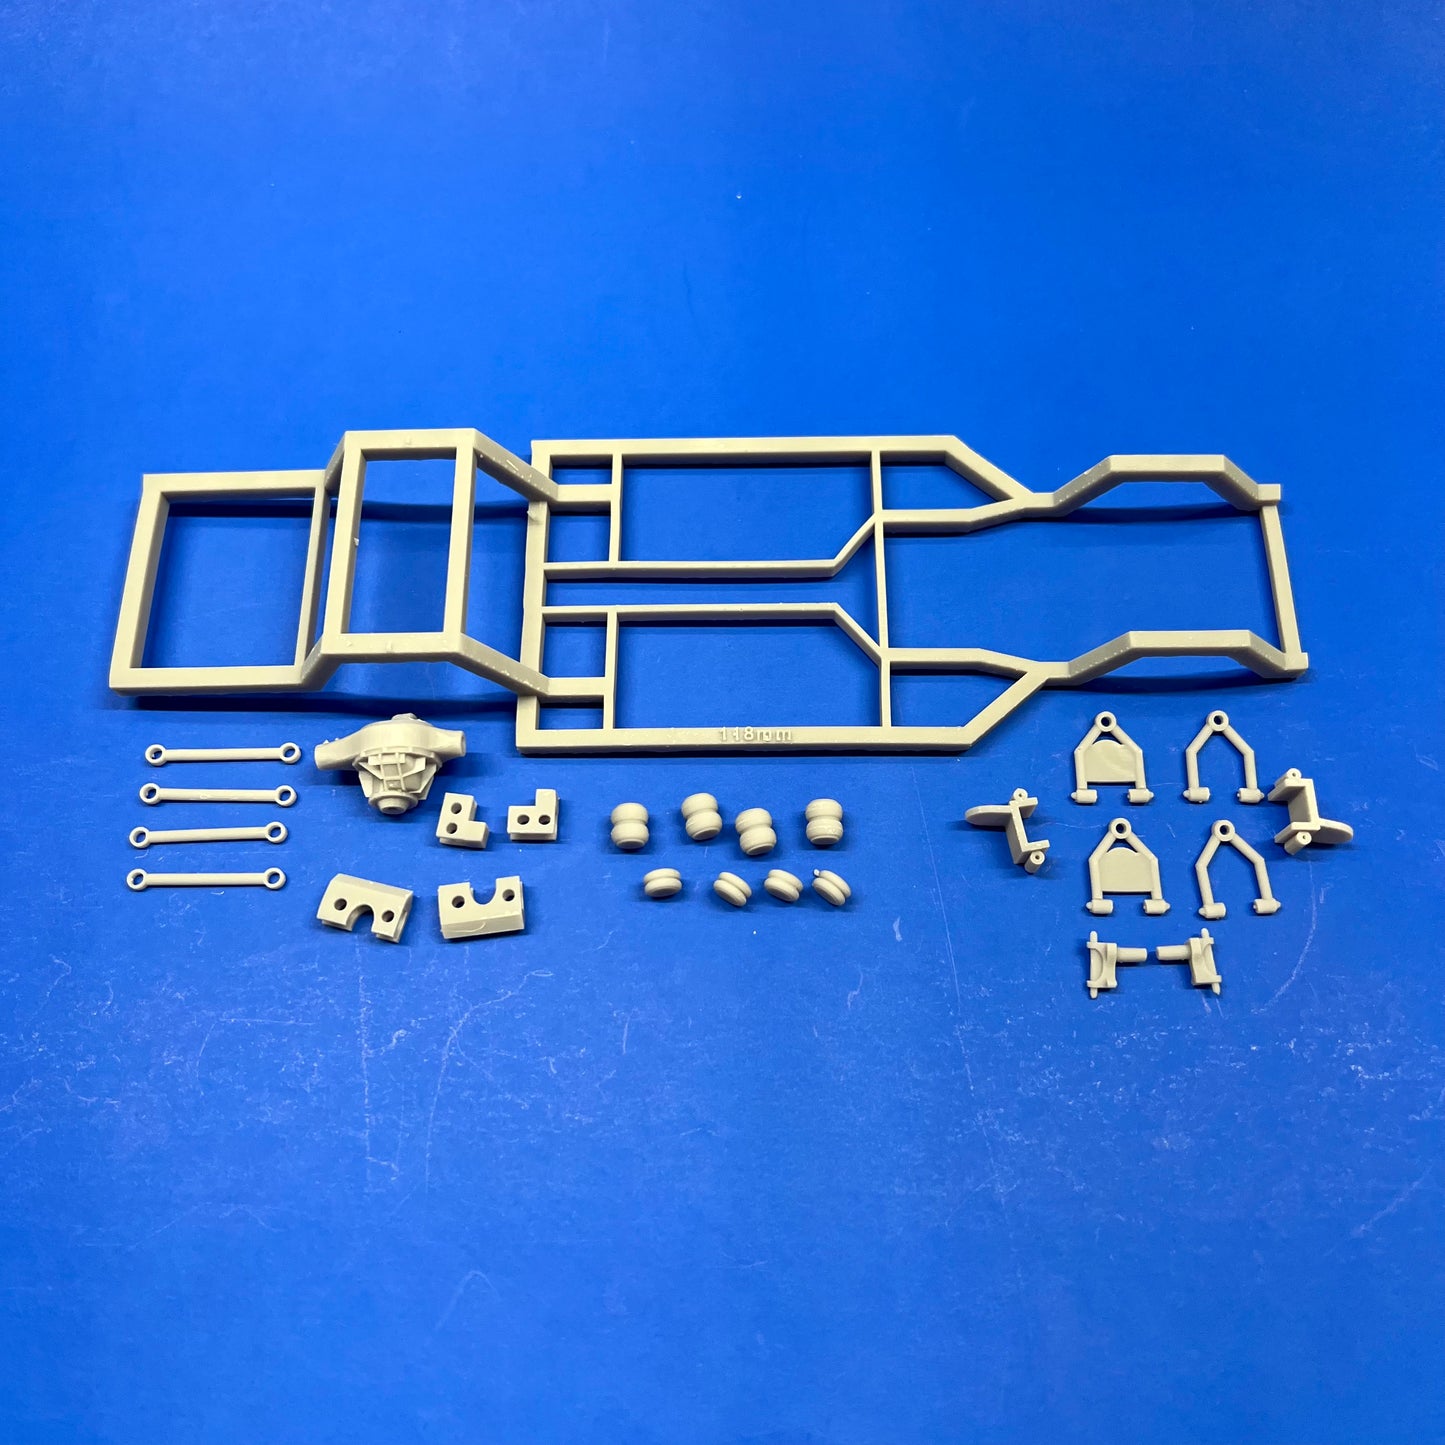 V0 C1500 Drop Kit Frame Chassis w/ Suspension for Chevy Kits 1/25